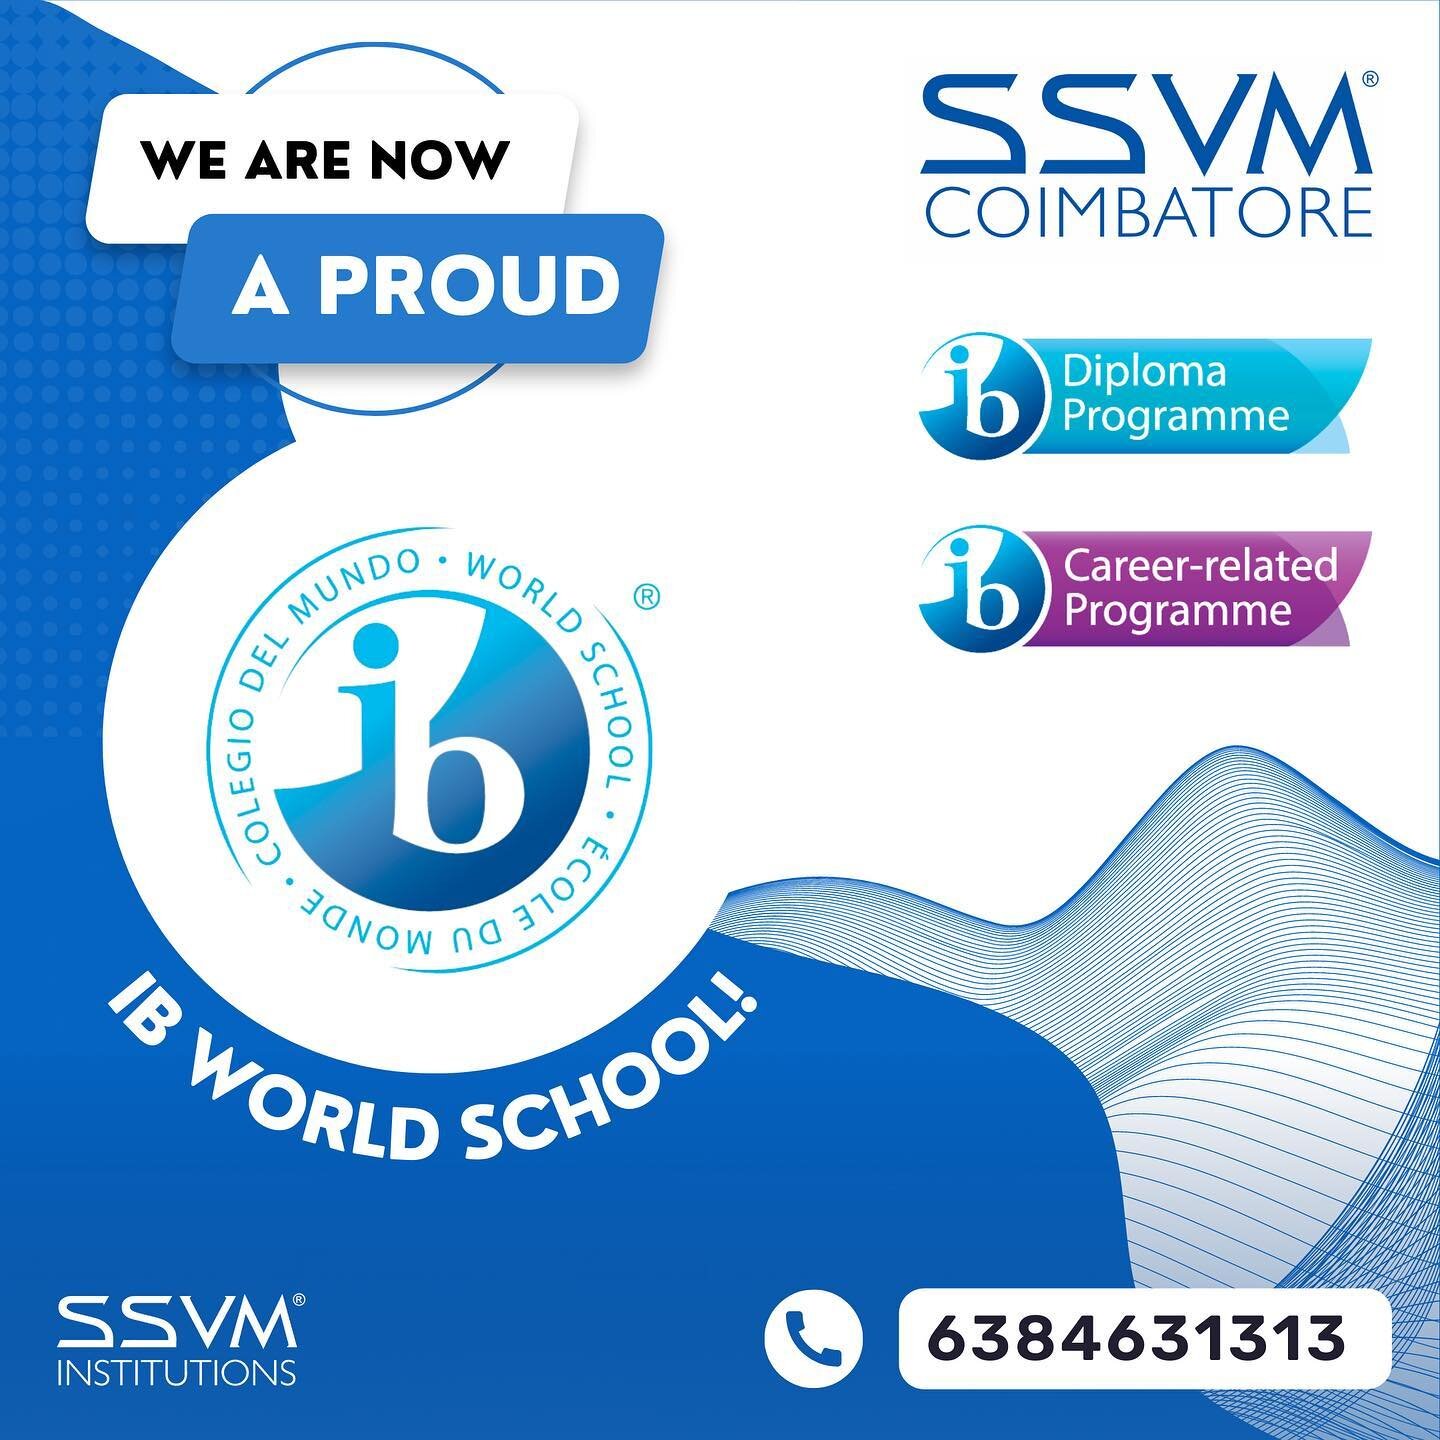 We are very proud to announce that we have been authorised as an&nbsp;International Baccalaureate&nbsp;World School, for the&nbsp;Diploma Programme (IBDP)&nbsp;and the Career-Related Programme (IBCP) that will start here at SSVM Institutions!

After 